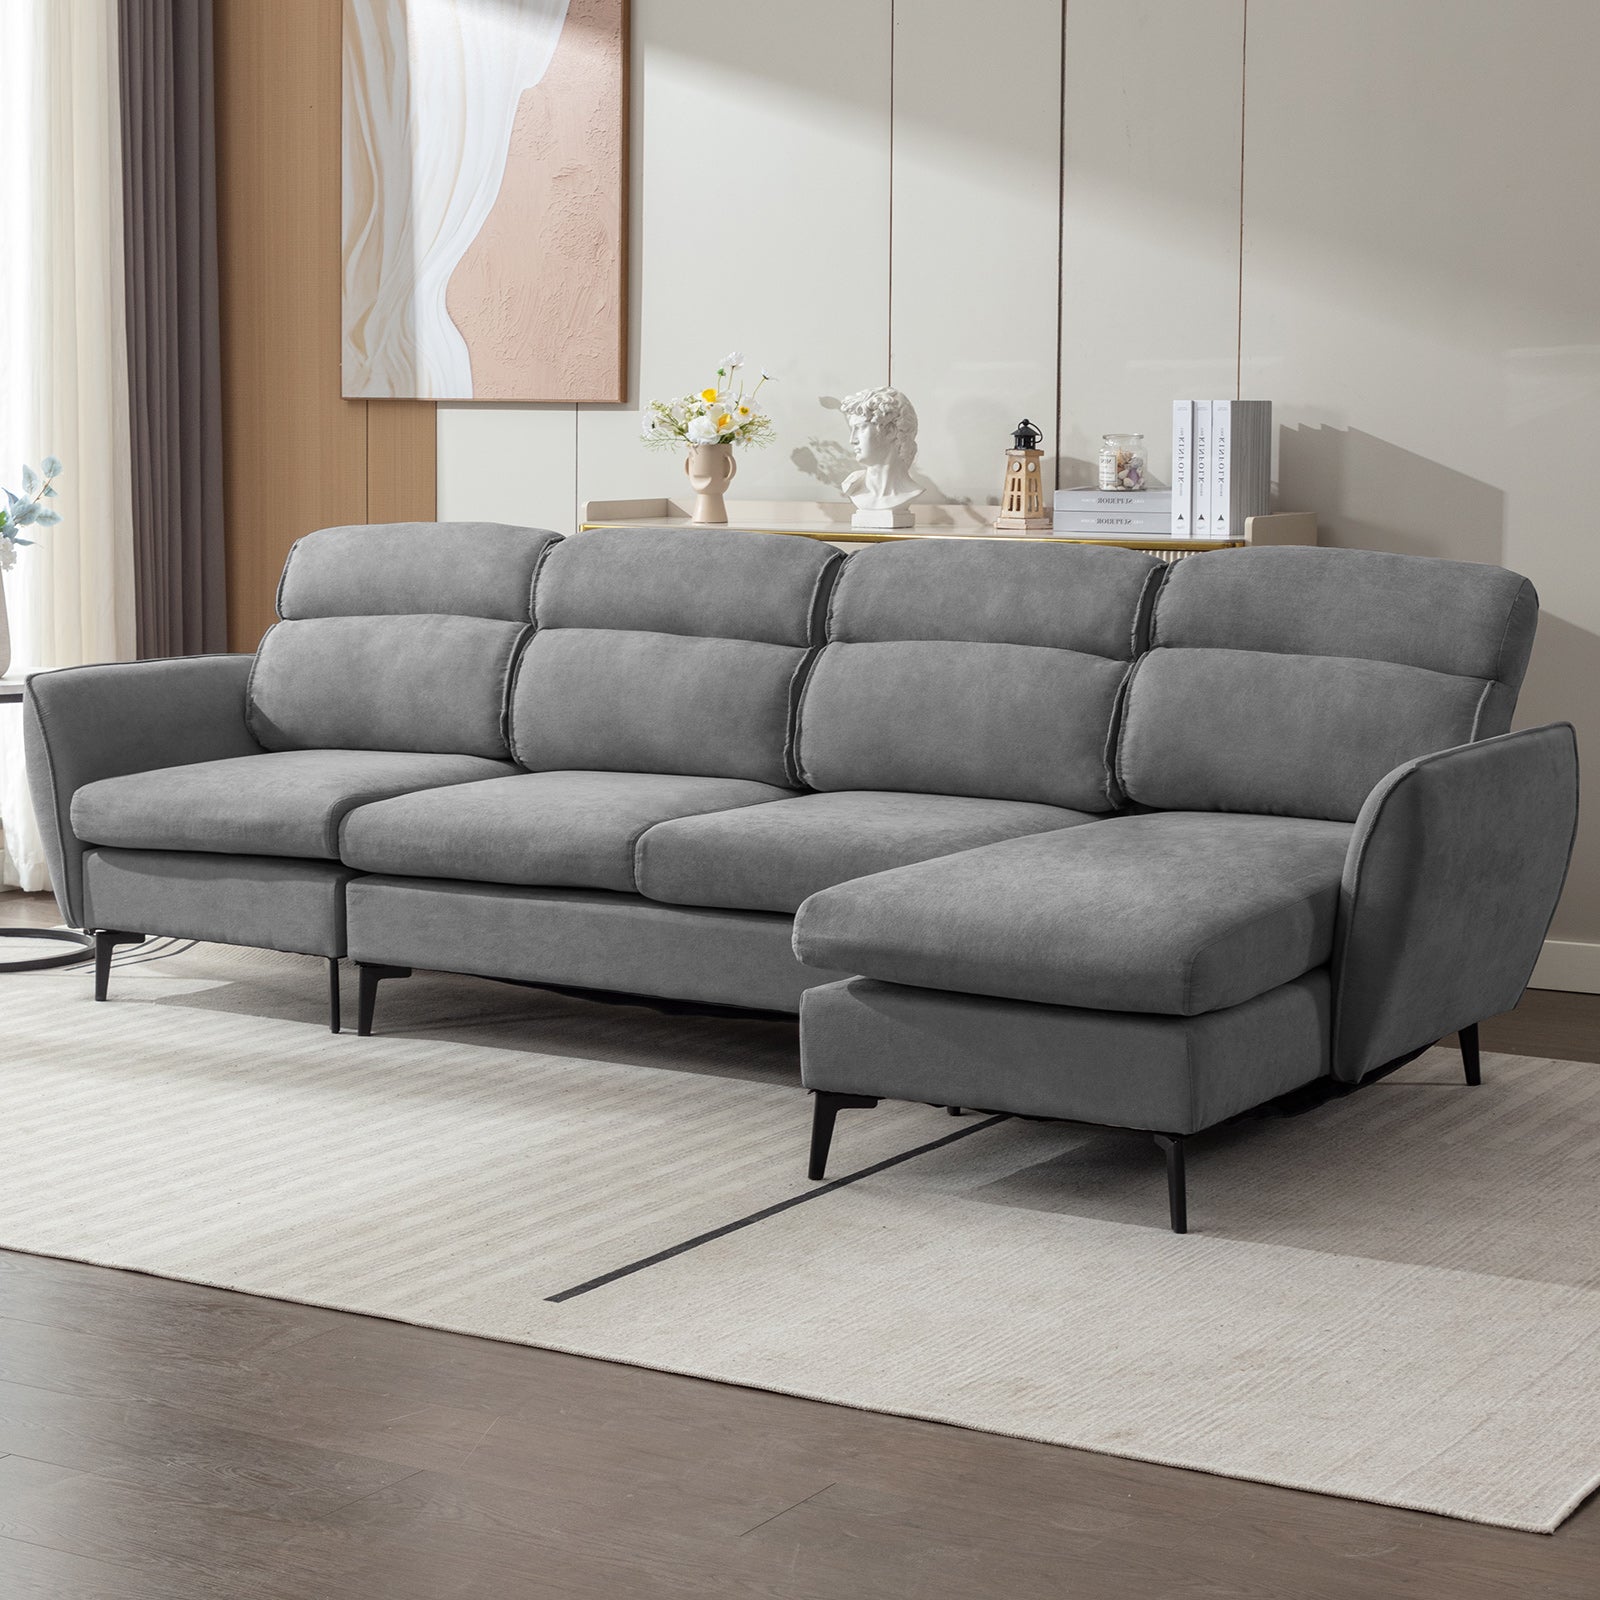 Cecer Living Room Sofa Set, Linen Sofa Sectional Couches for Living Room with Spacious Seat and Sturdy Wooden Frame